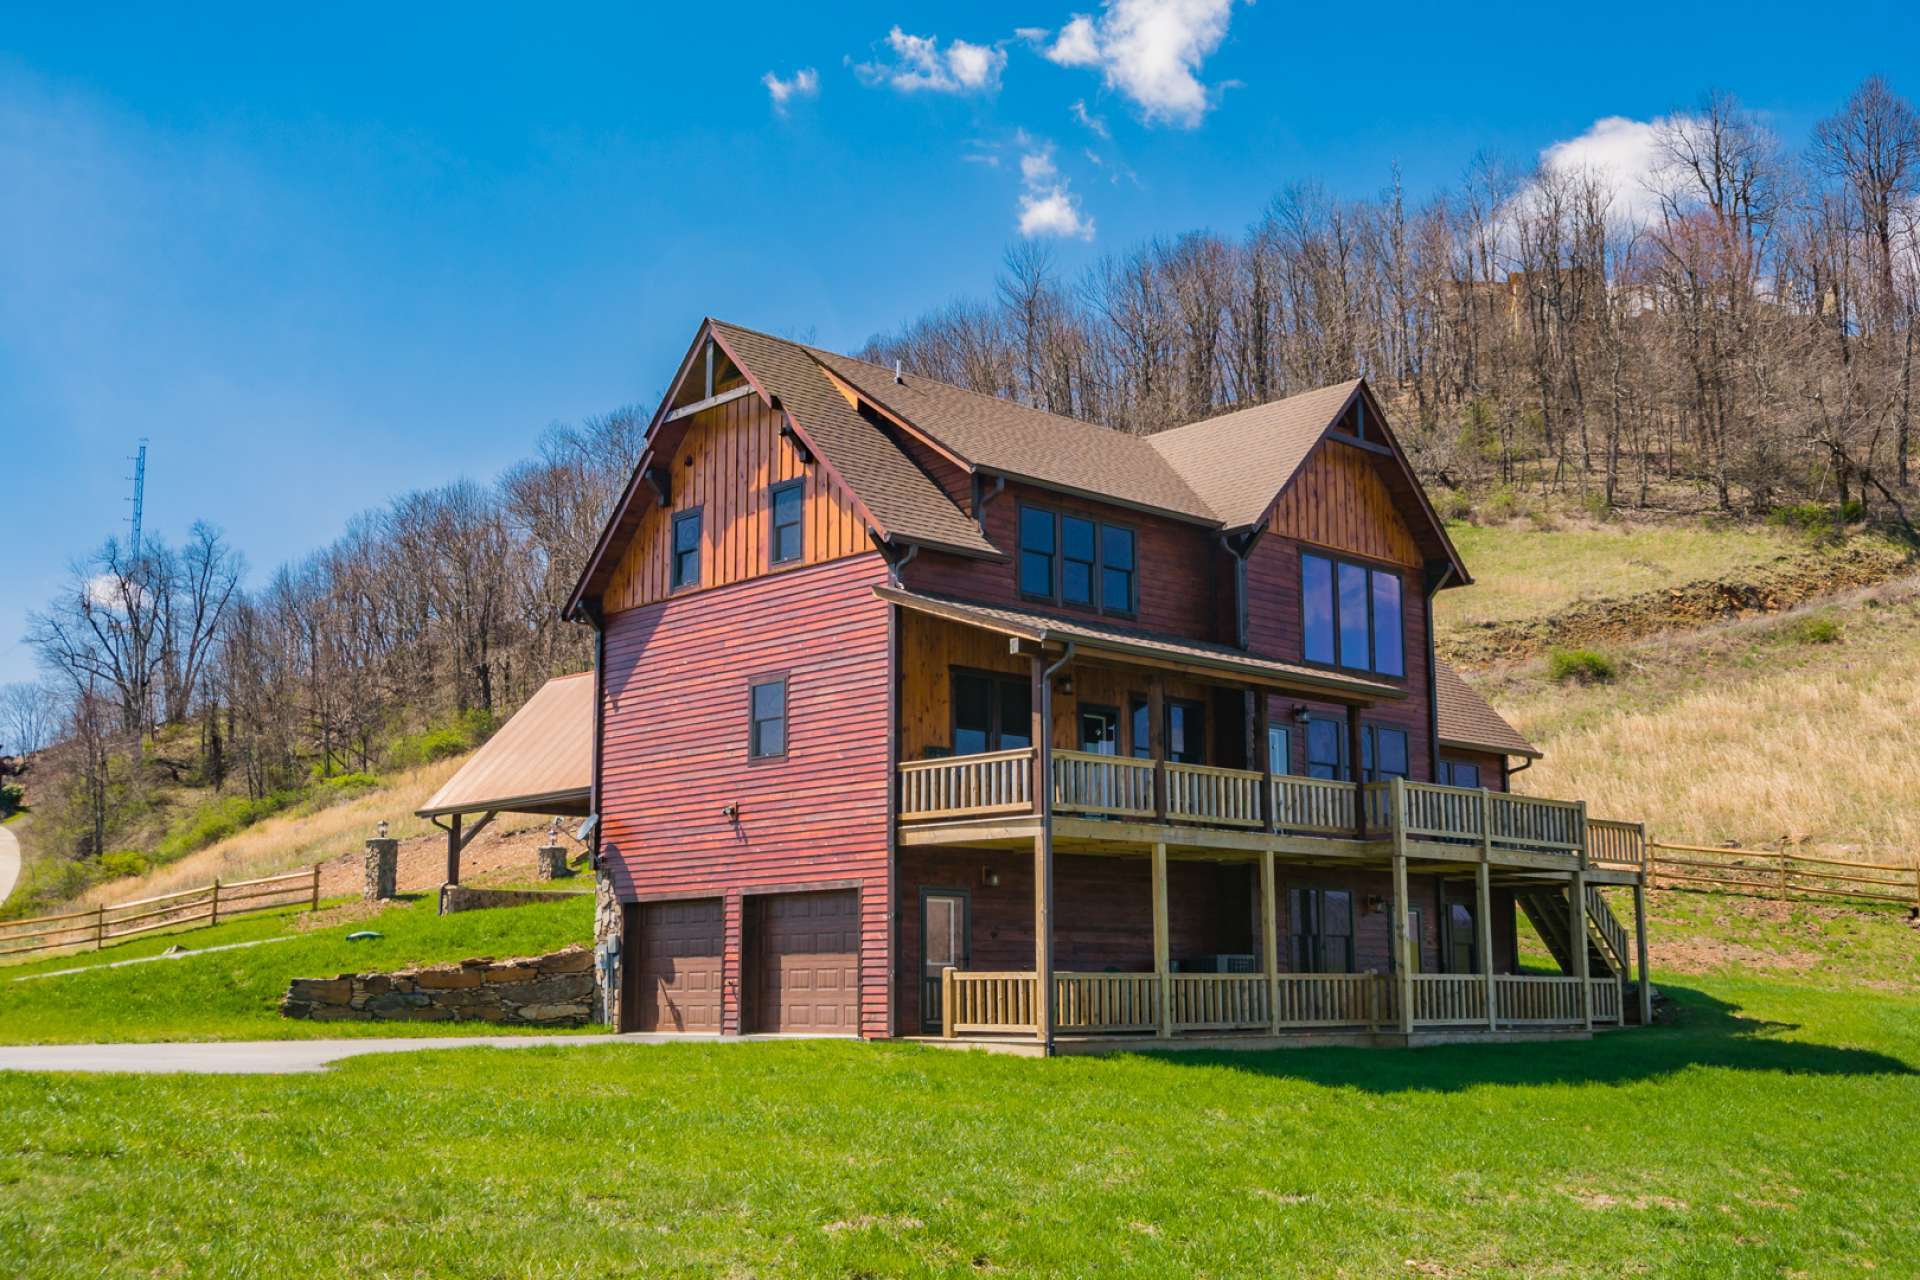 Call today for an appointment to view this extraordinary custom mountain home with unique custom details throughout, lots of outdoor entertaining space, 2-car garage, and a peaceful setting in the Todd area of Southern Ashe County convenient to Boone and West Jefferson.